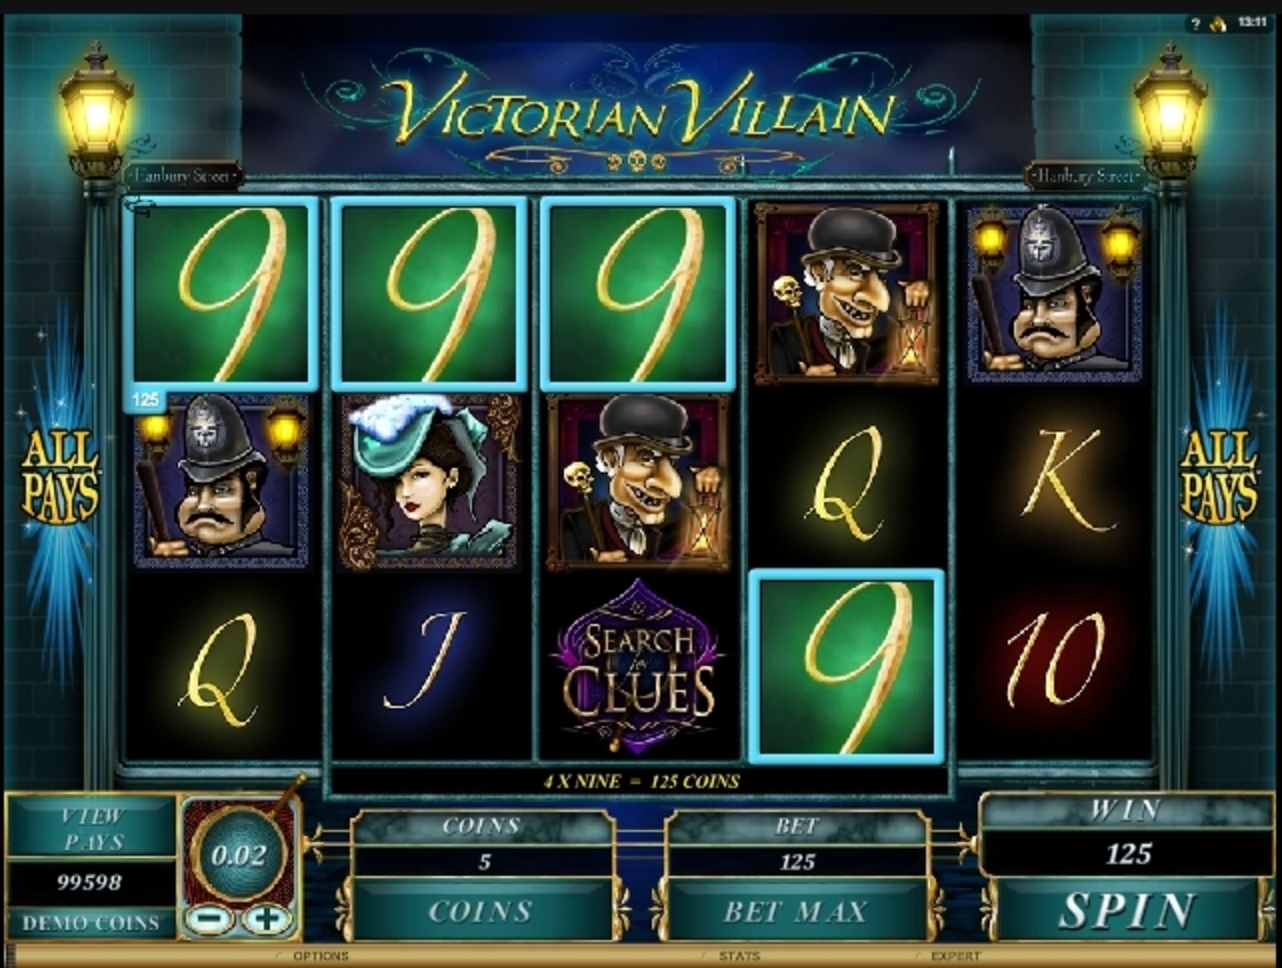 Win Money in Victorian Villain Free Slot Game by Microgaming